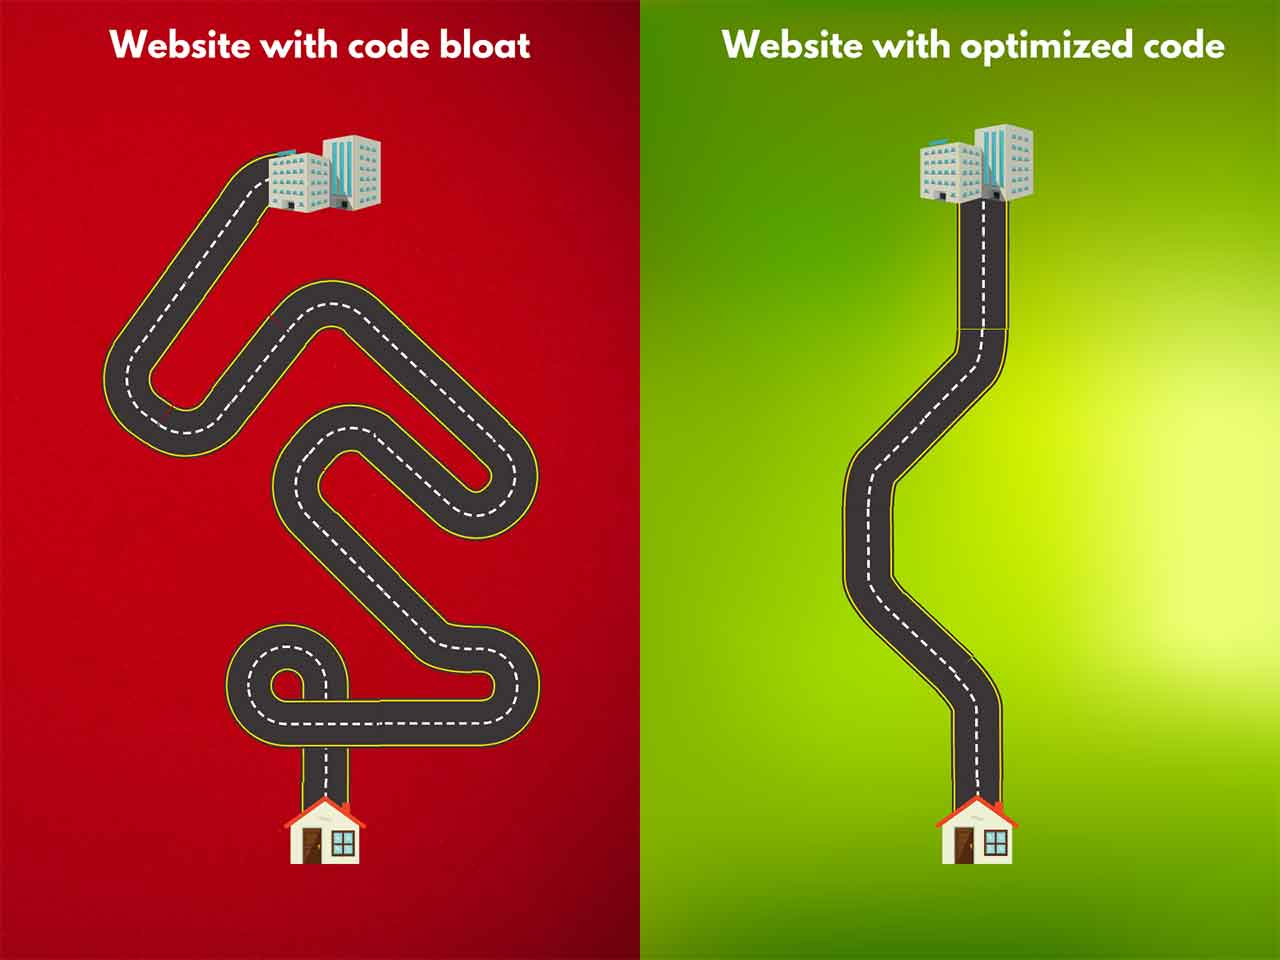 illustrating the difference between websites with code bloat and websites with optimized code